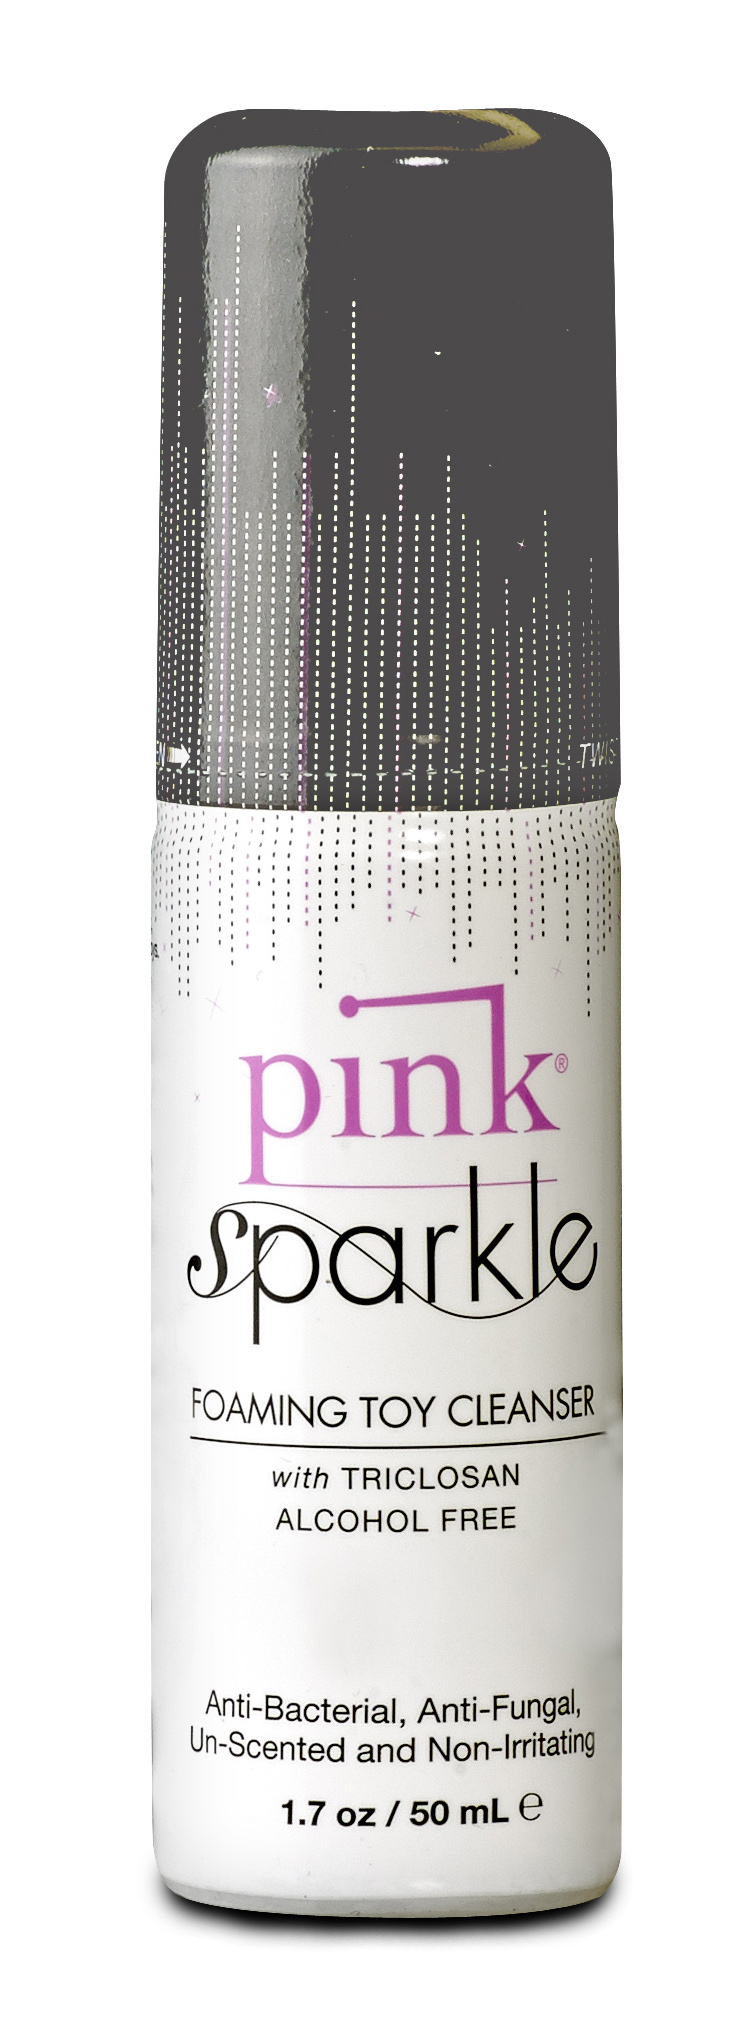 PINK SPARKLE TOY CLEANER 1.7 OZ  